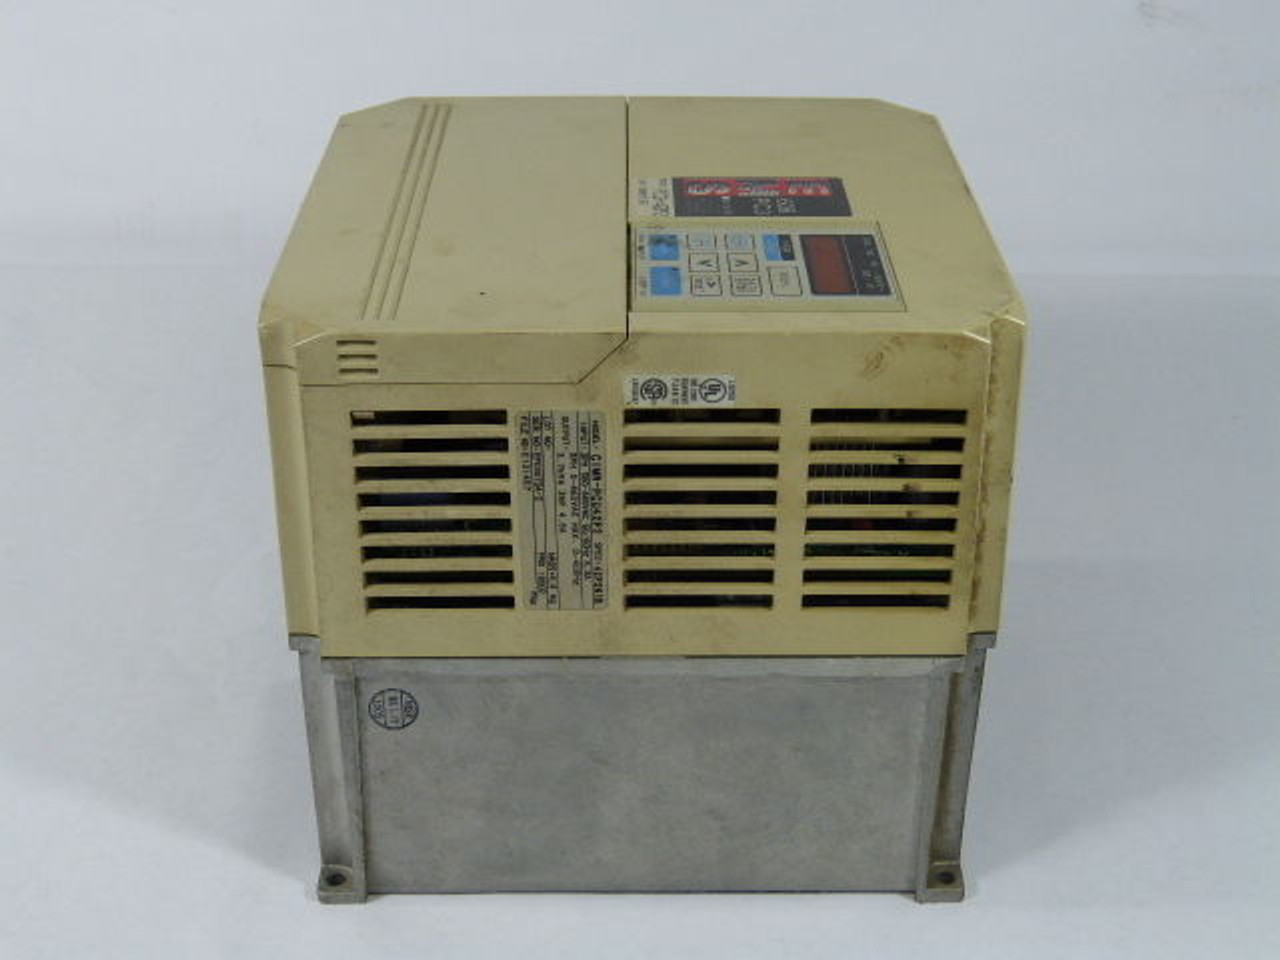 Safetronics CIMR-PCU42P2 Frequency Drive 3HP 460V USED